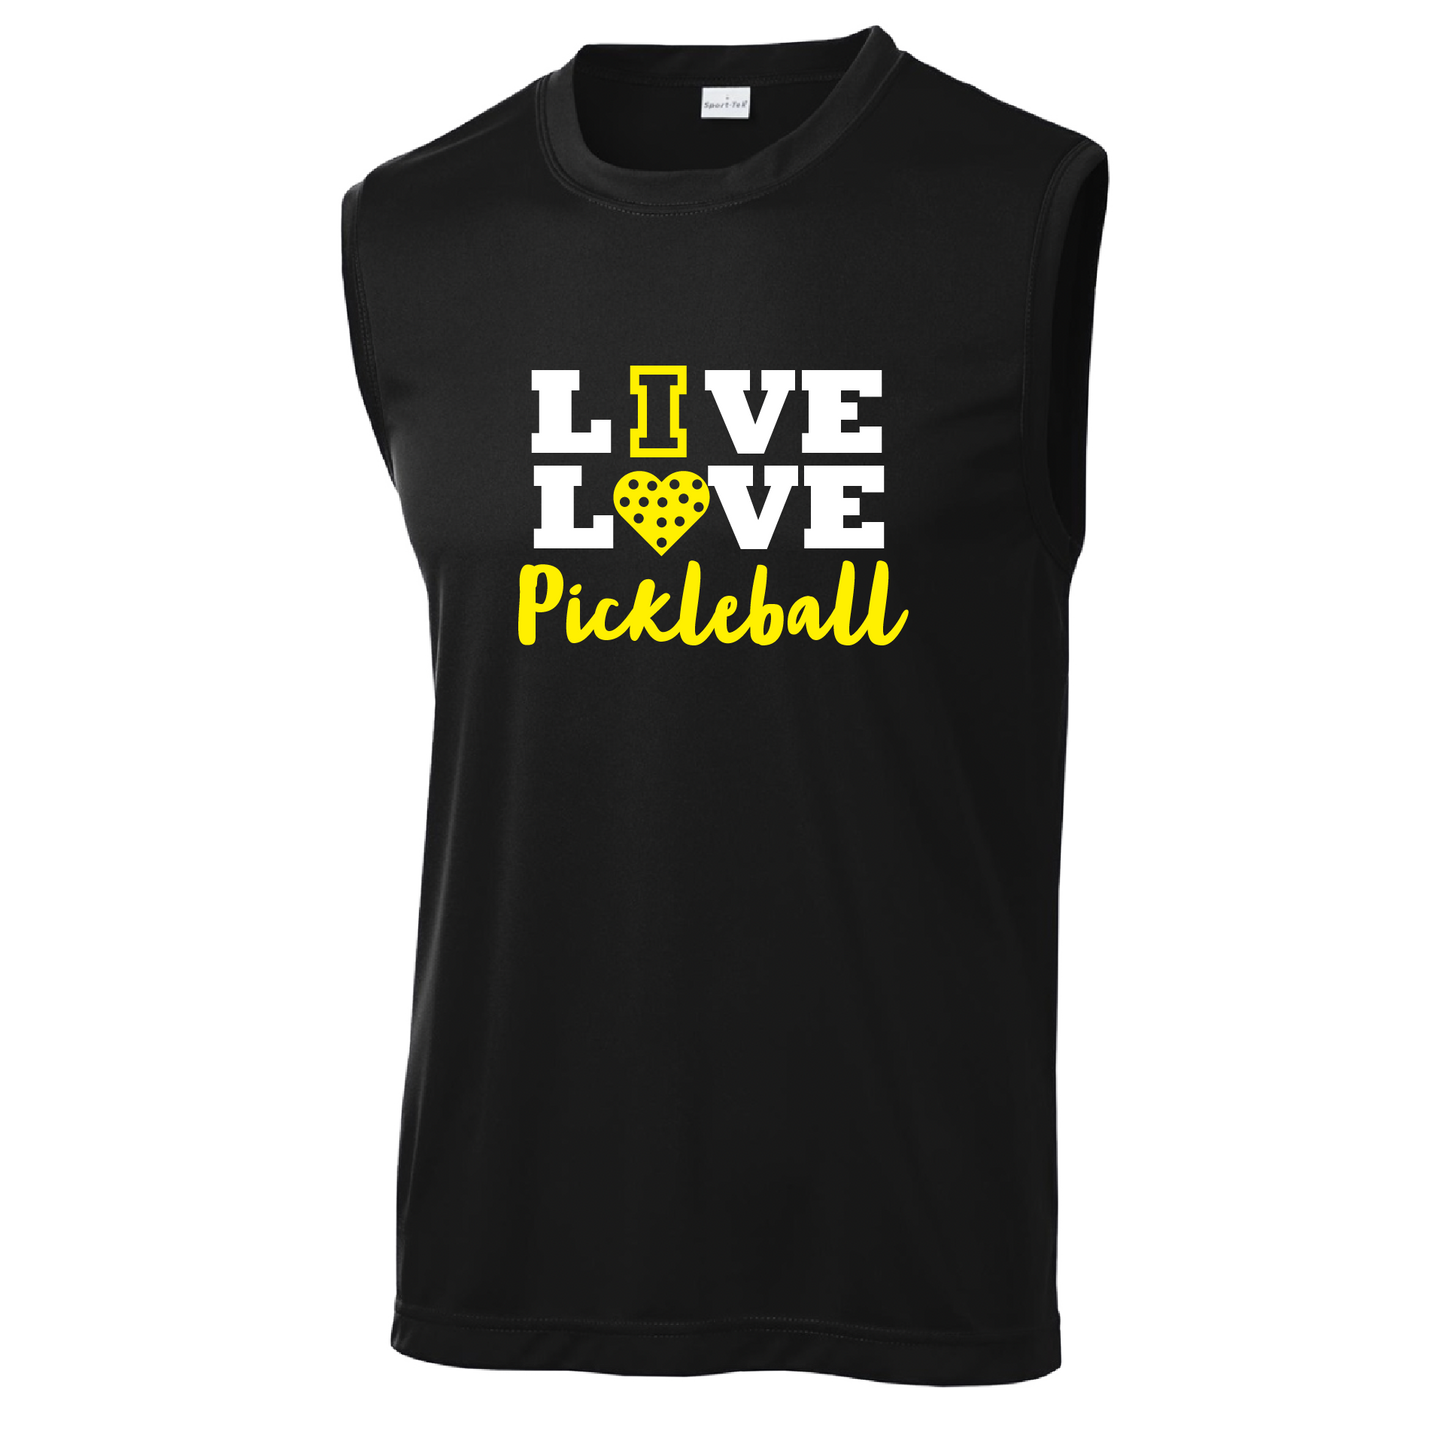 Pickleball Design: Live Love Pickleball  Men's Style: Sleeveless  Shirts are lightweight, roomy and highly breathable. These moisture-wicking shirts are designed for athletic performance. They feature PosiCharge technology to lock in color and prevent logos from fading. Removable tag and set-in sleeves for comfort.